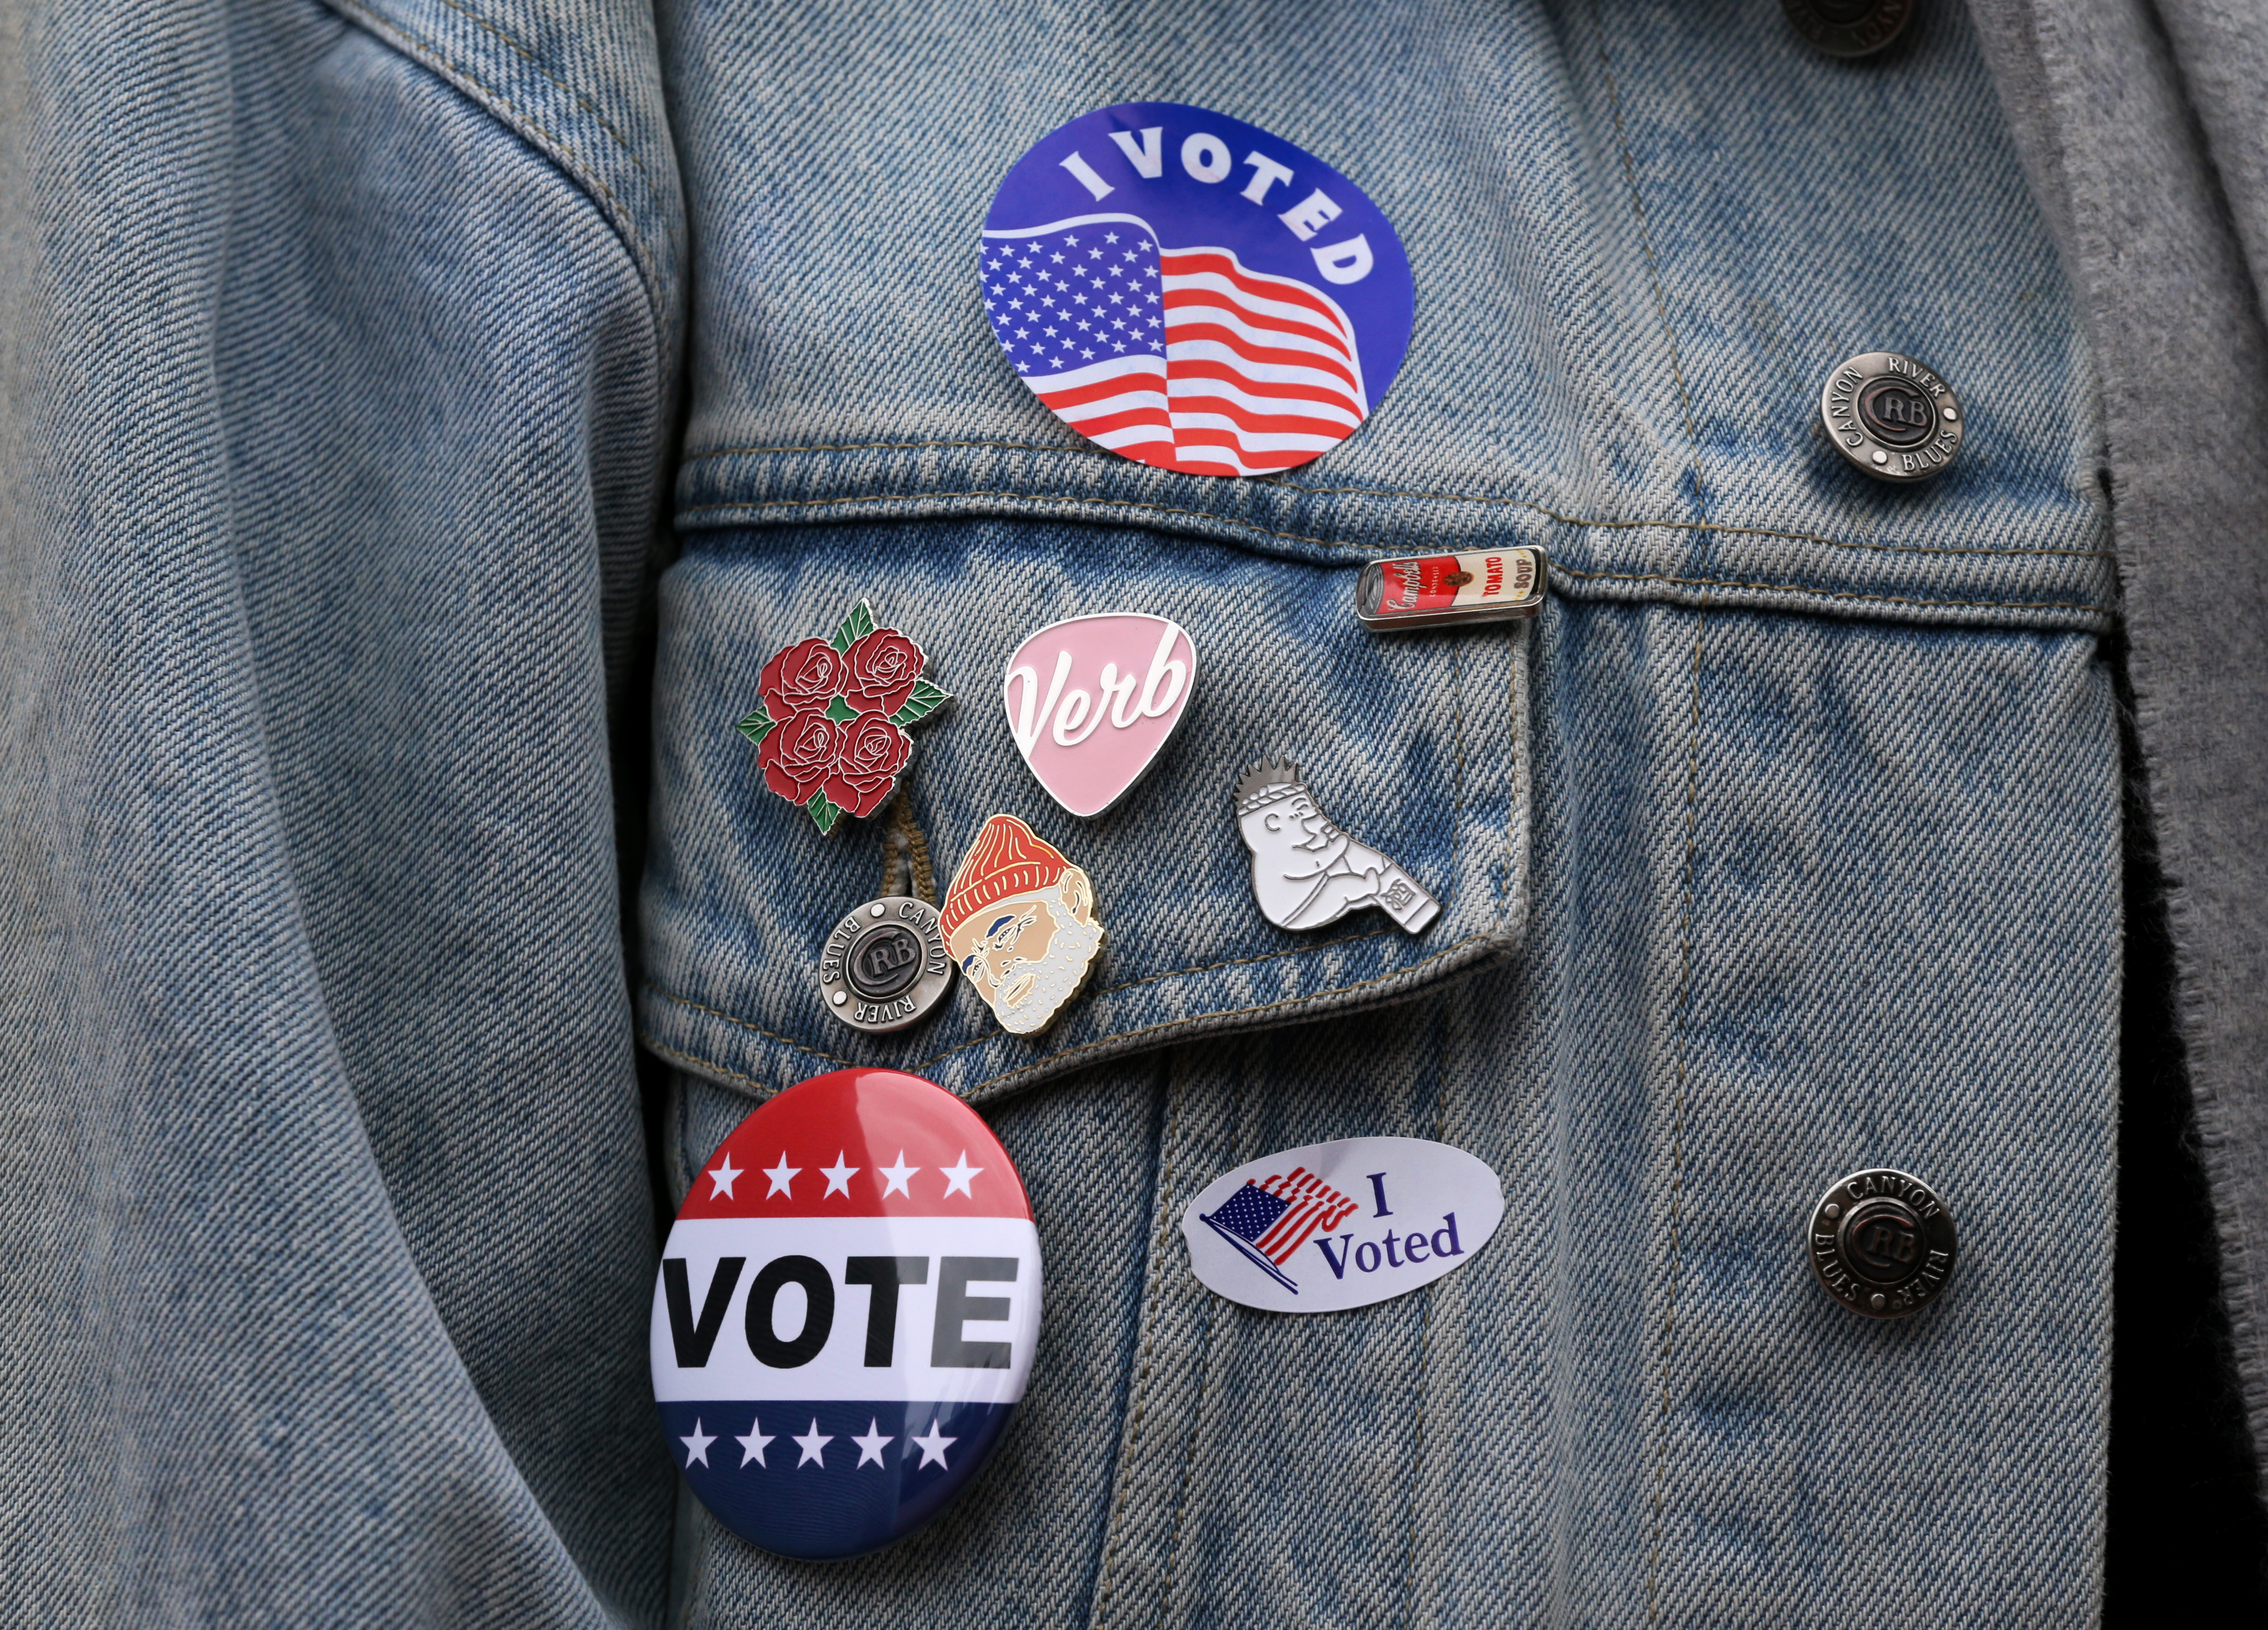 A person poses voting stickers and pins.